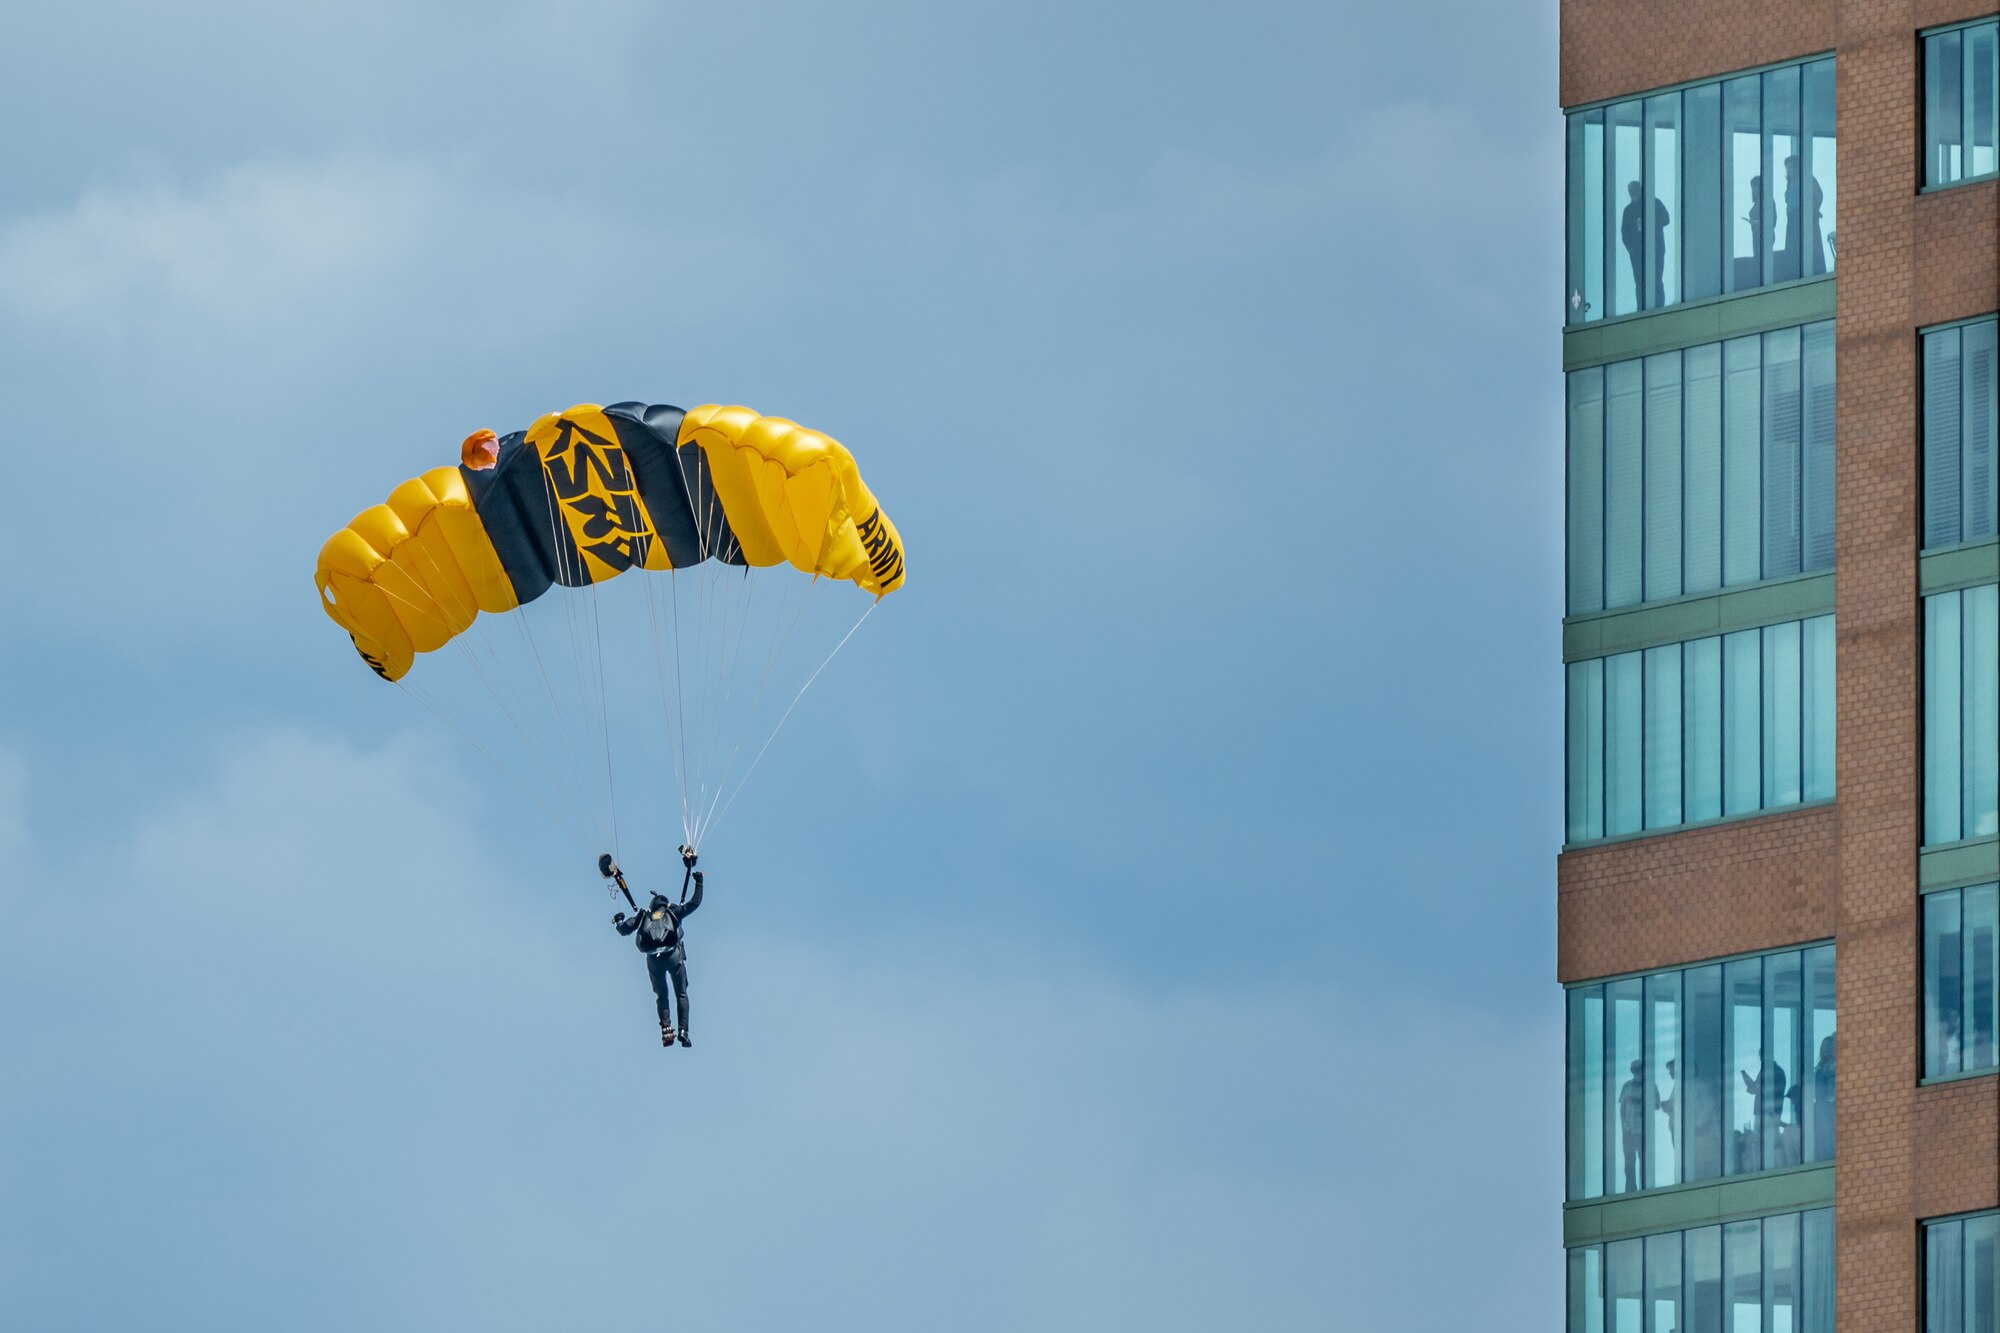 A Soldier from the U.S. Army’s Golden Knights demonstration team parachutes into Waterfront Park in downtown Louisville, Ky., on April 22, 2023, to kick of the annual Thunder Over Louisville air show. This year’s event featured more than 20 military and civilian planes, including a C-130J Super Hercules from the Kentucky Air National Guard, which served as the base of operations for military aircraft participating in the show. (U.S. Air National Guard photo by Dale Greer)